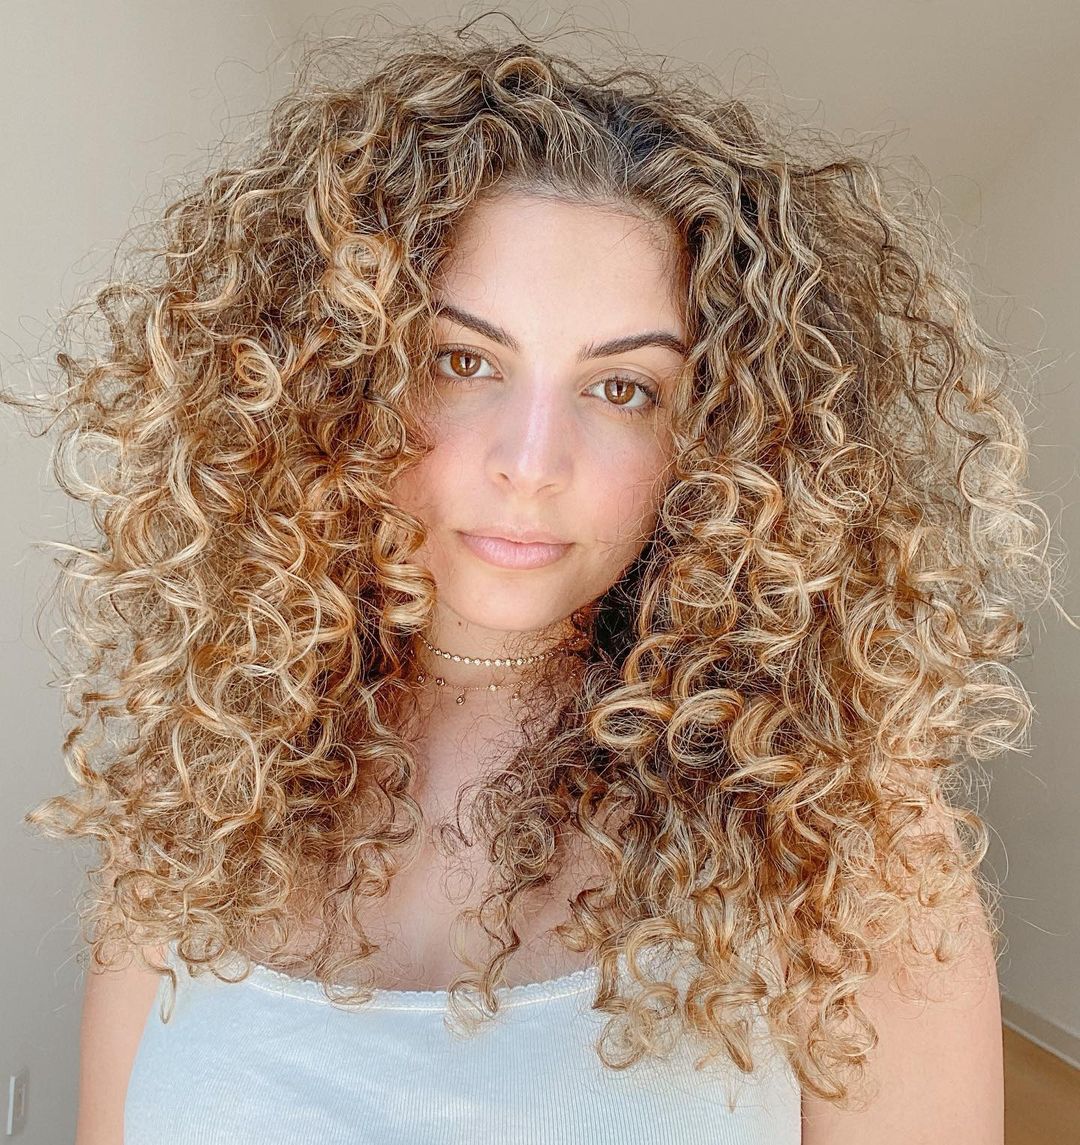 33 Blonde Curly Hair Ideas Trending This Year